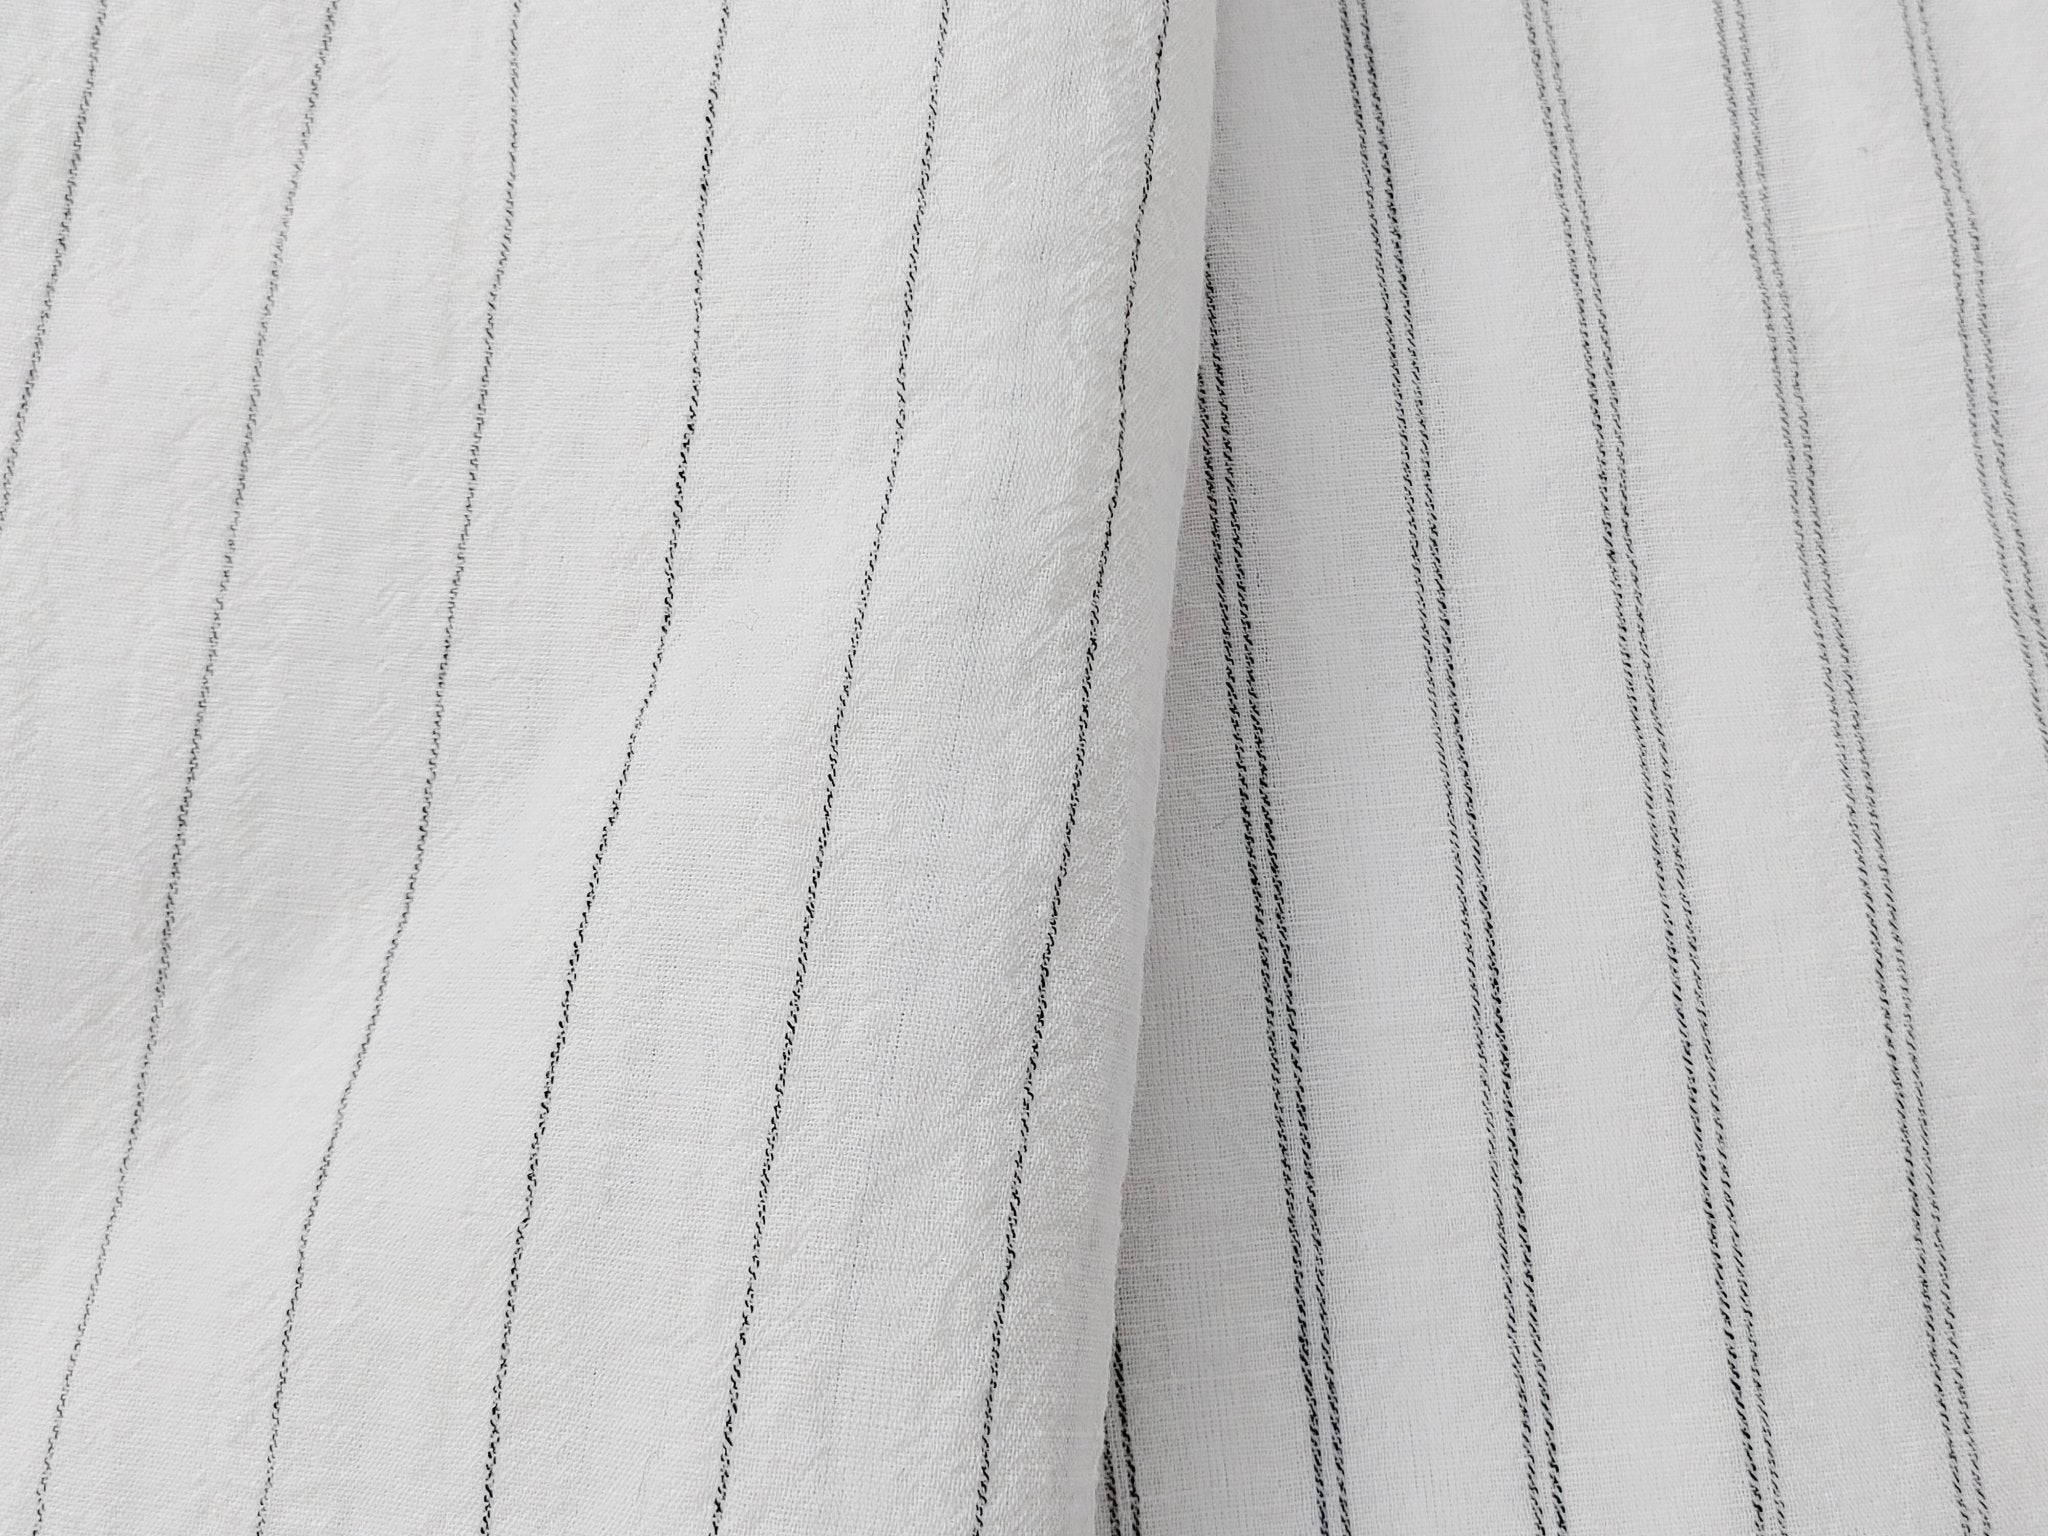 Airy Stripes: Linen with High-Twisted Cotton Lightweight Stripe Fabric 6109 6110 6111 6049 - The Linen Lab - Blue